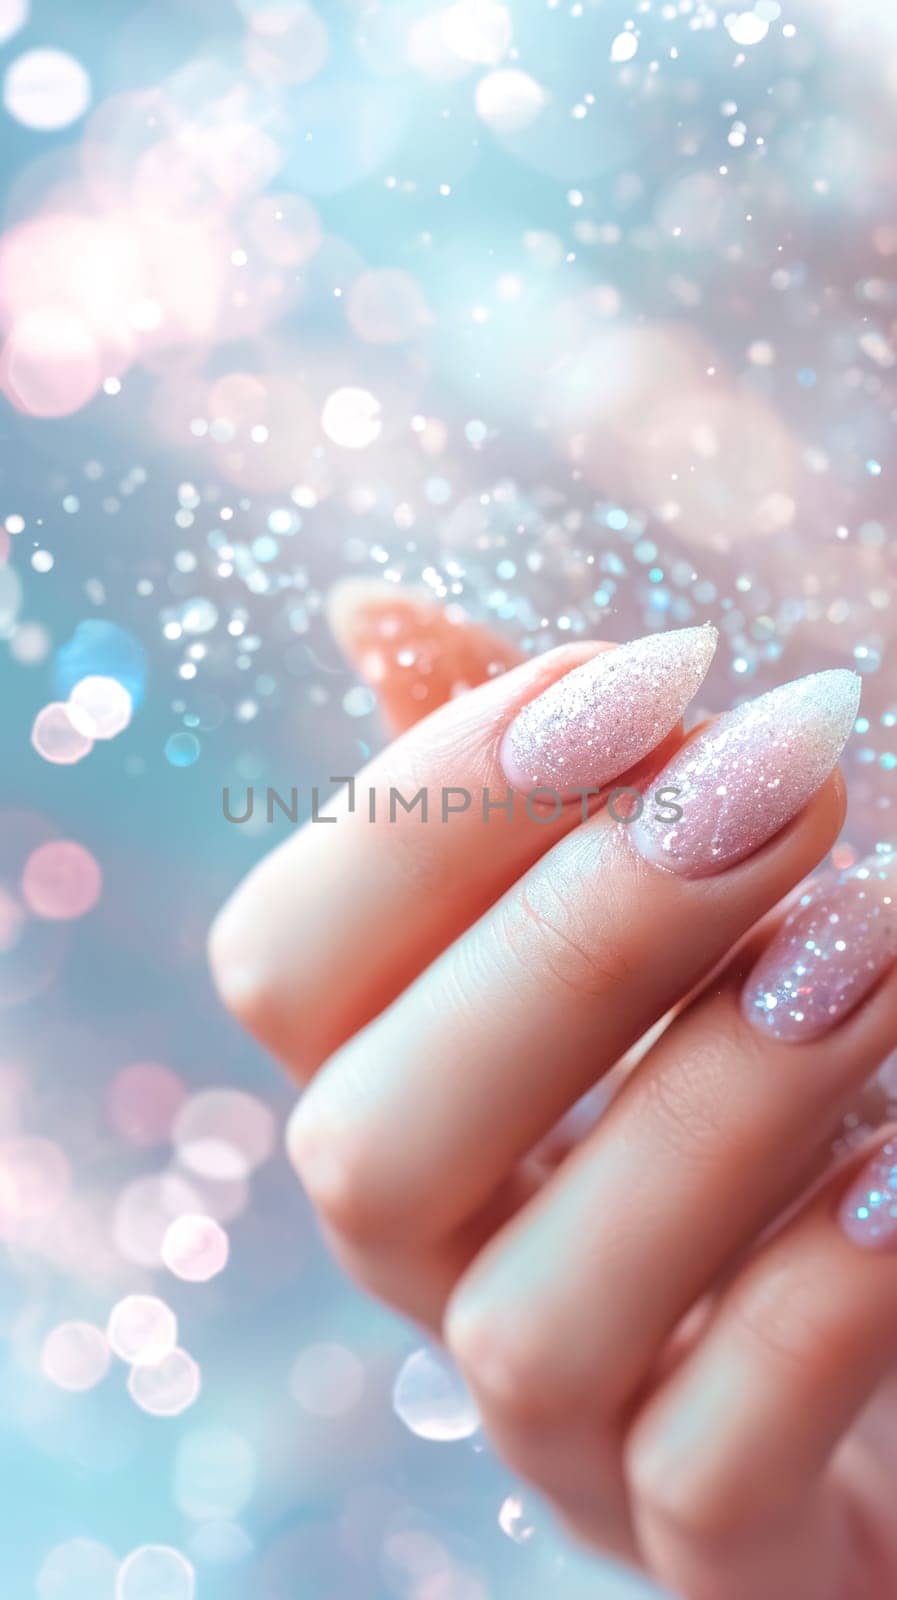 hand showing off beautifully manicured nails with a sparkling, glittery finish, set against a soft, dreamy background with light bokeh, conveying a sense of elegance and attention to beauty detail by Edophoto